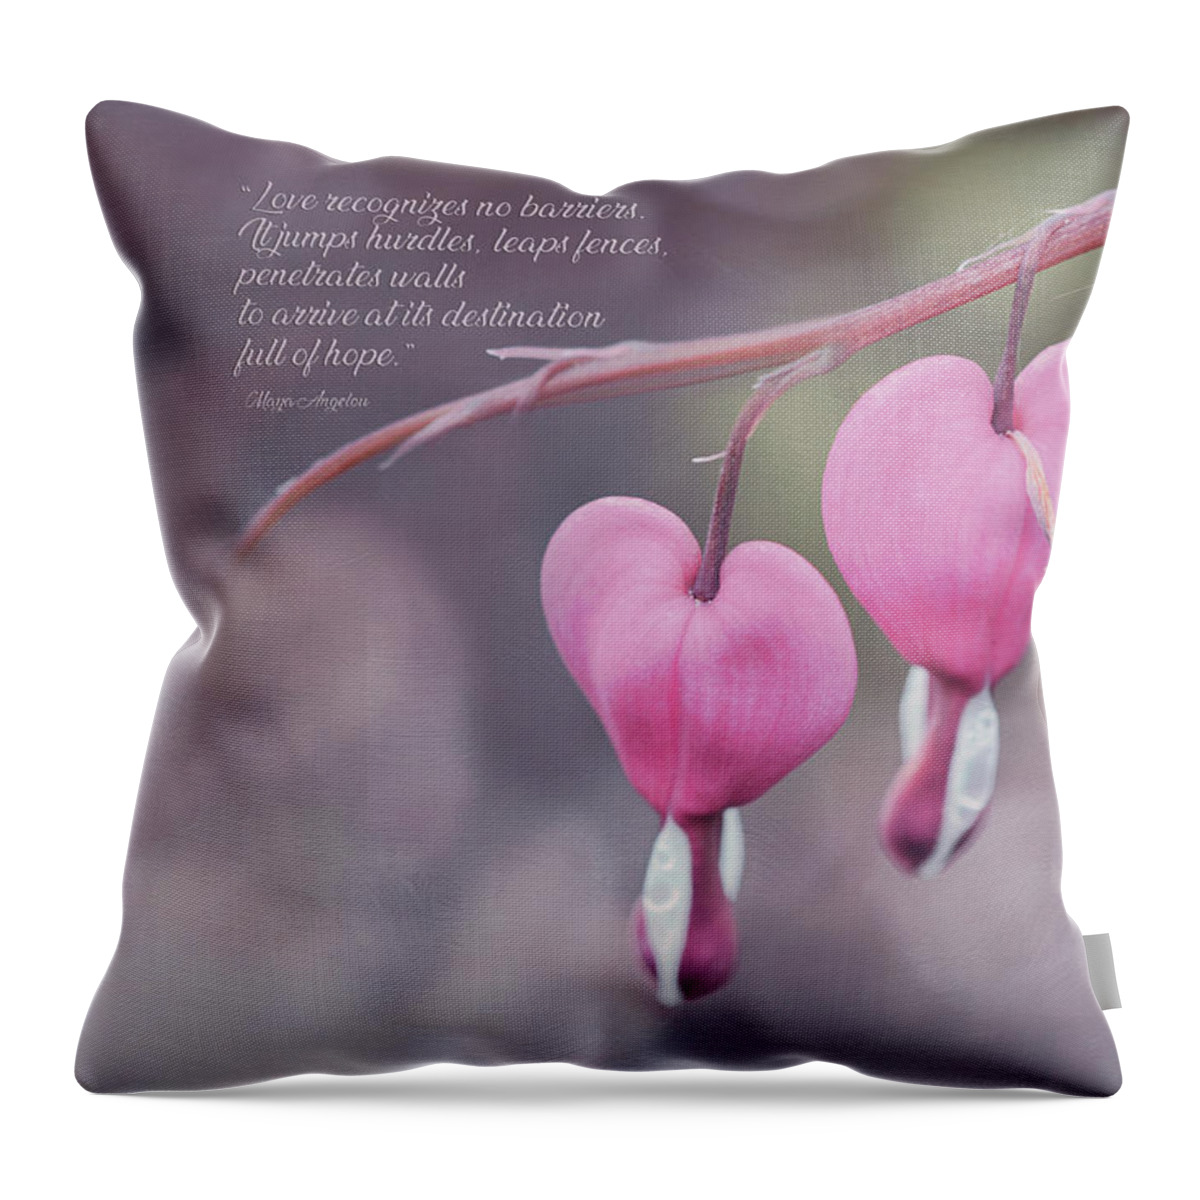 Maya Angelou Throw Pillow featuring the photograph Love Recognizes No Barriers by Maria Angelica Maira